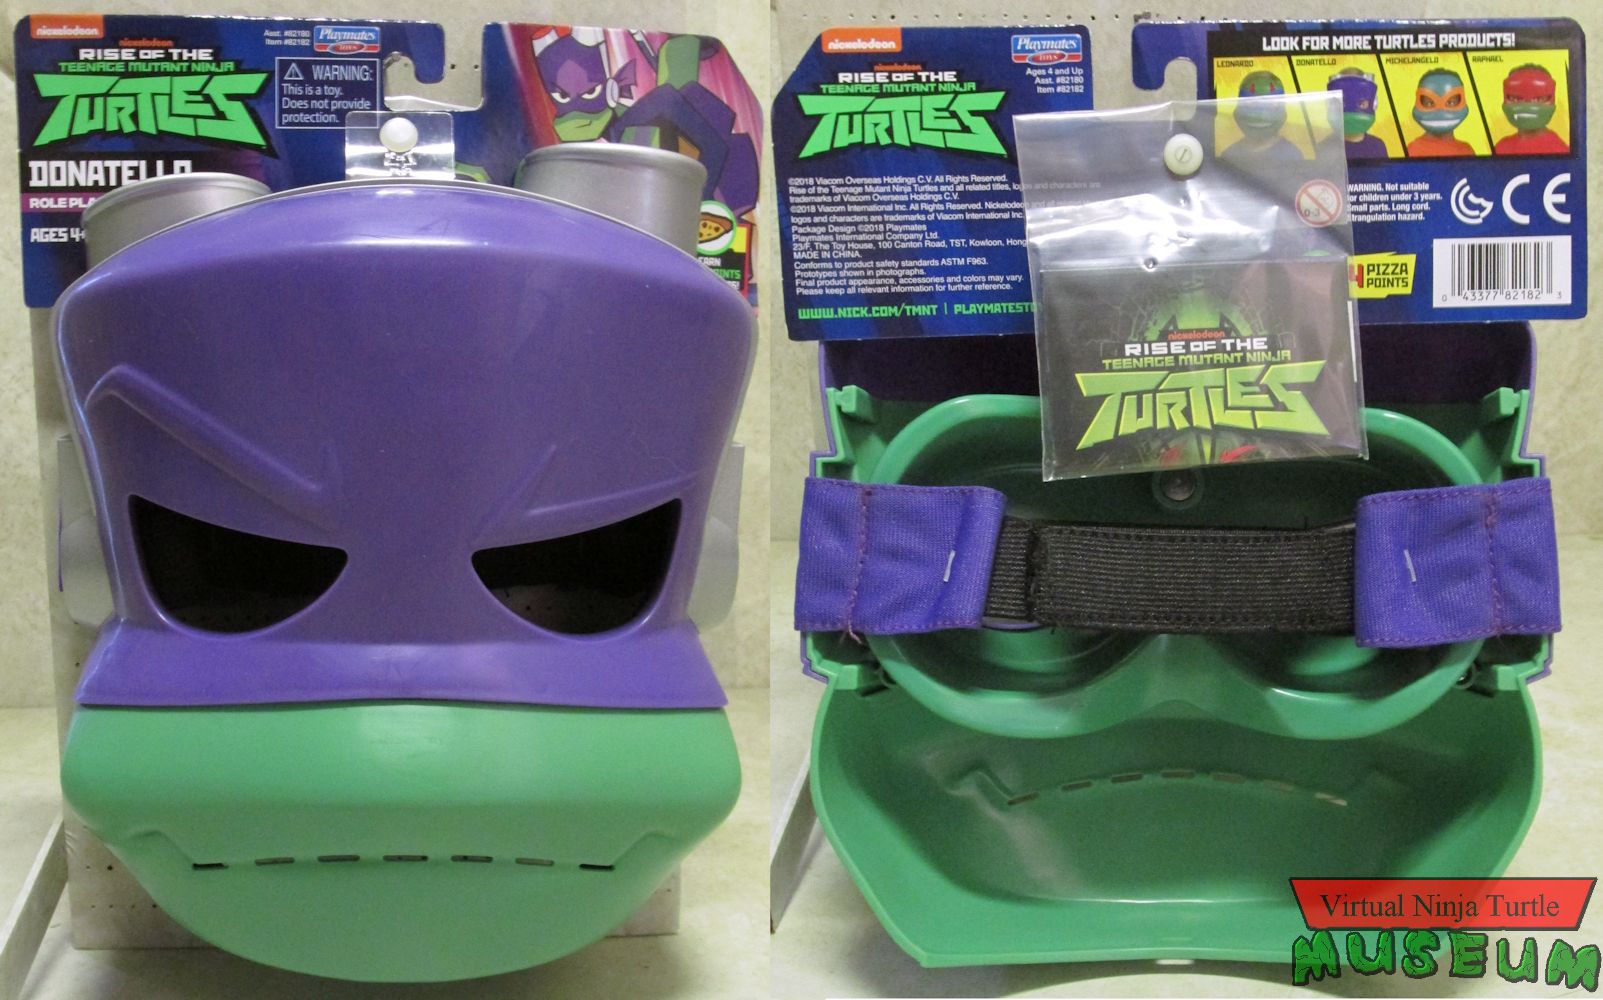 Donatello Role Play Mask front and back